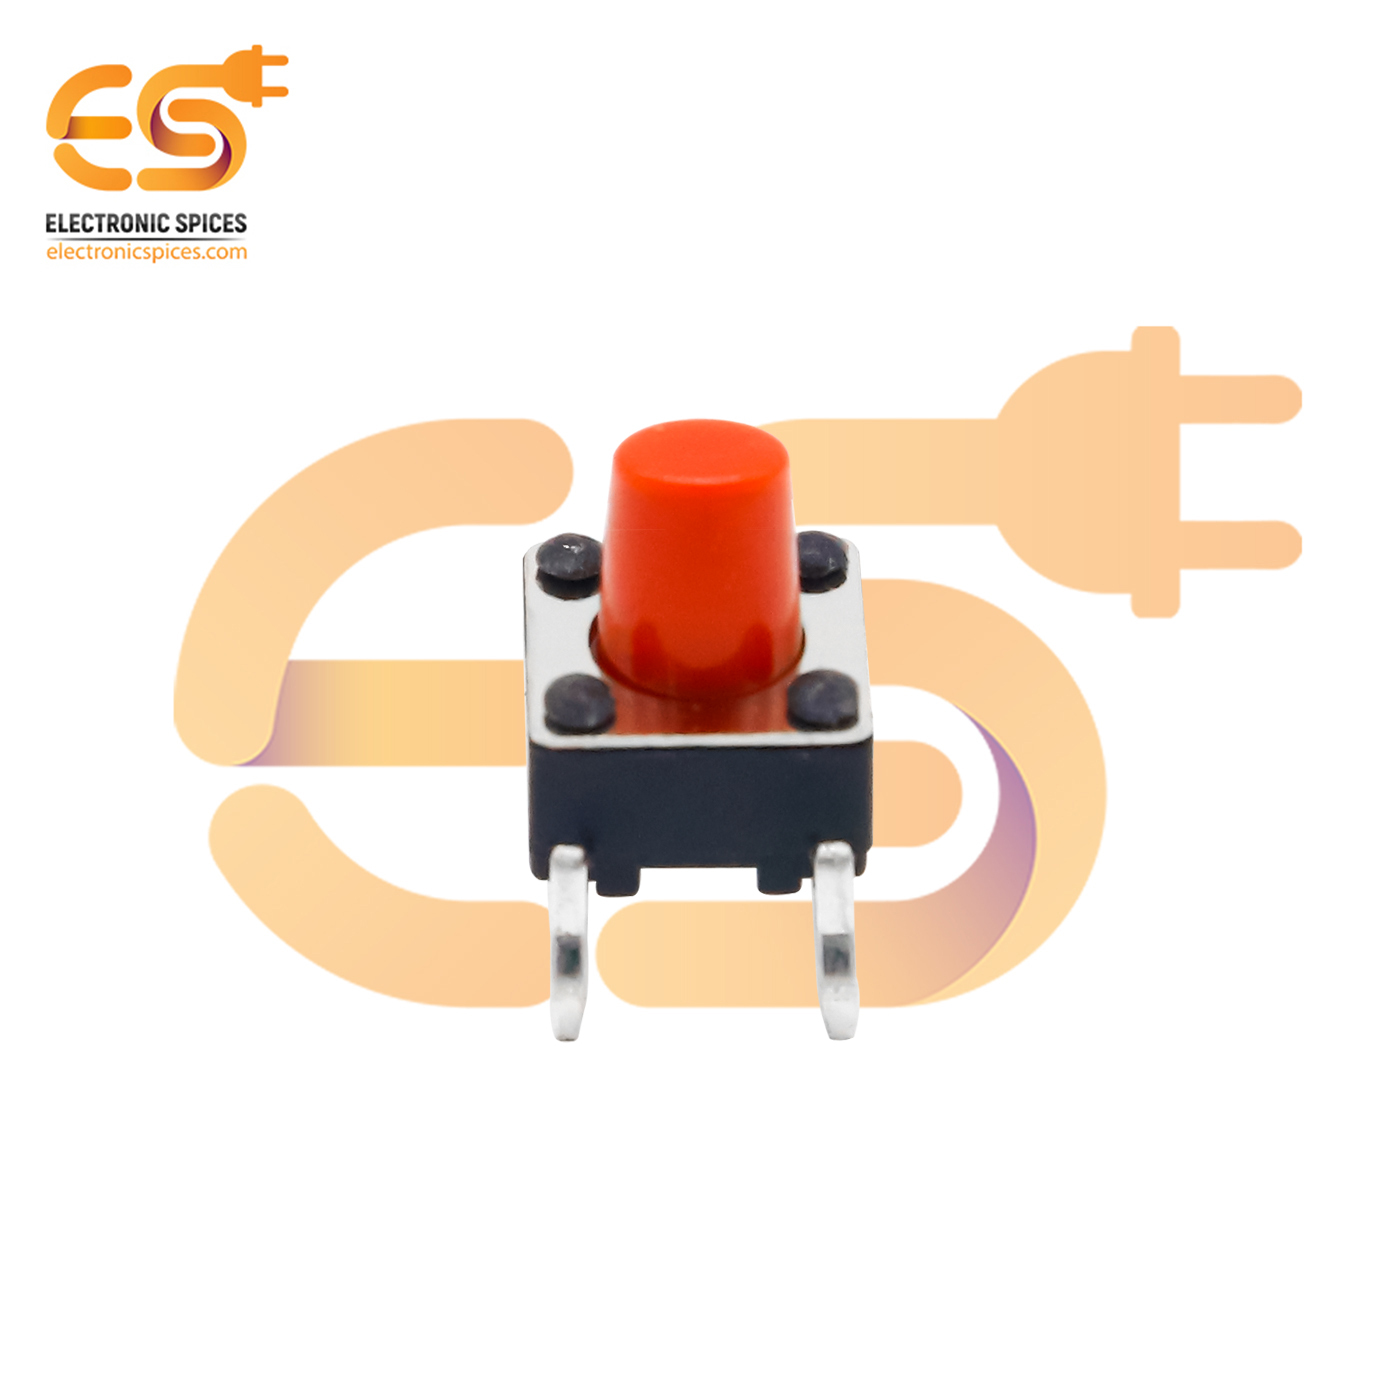 6 x 6 x 5mm Red color tactile momentary push buttons switches